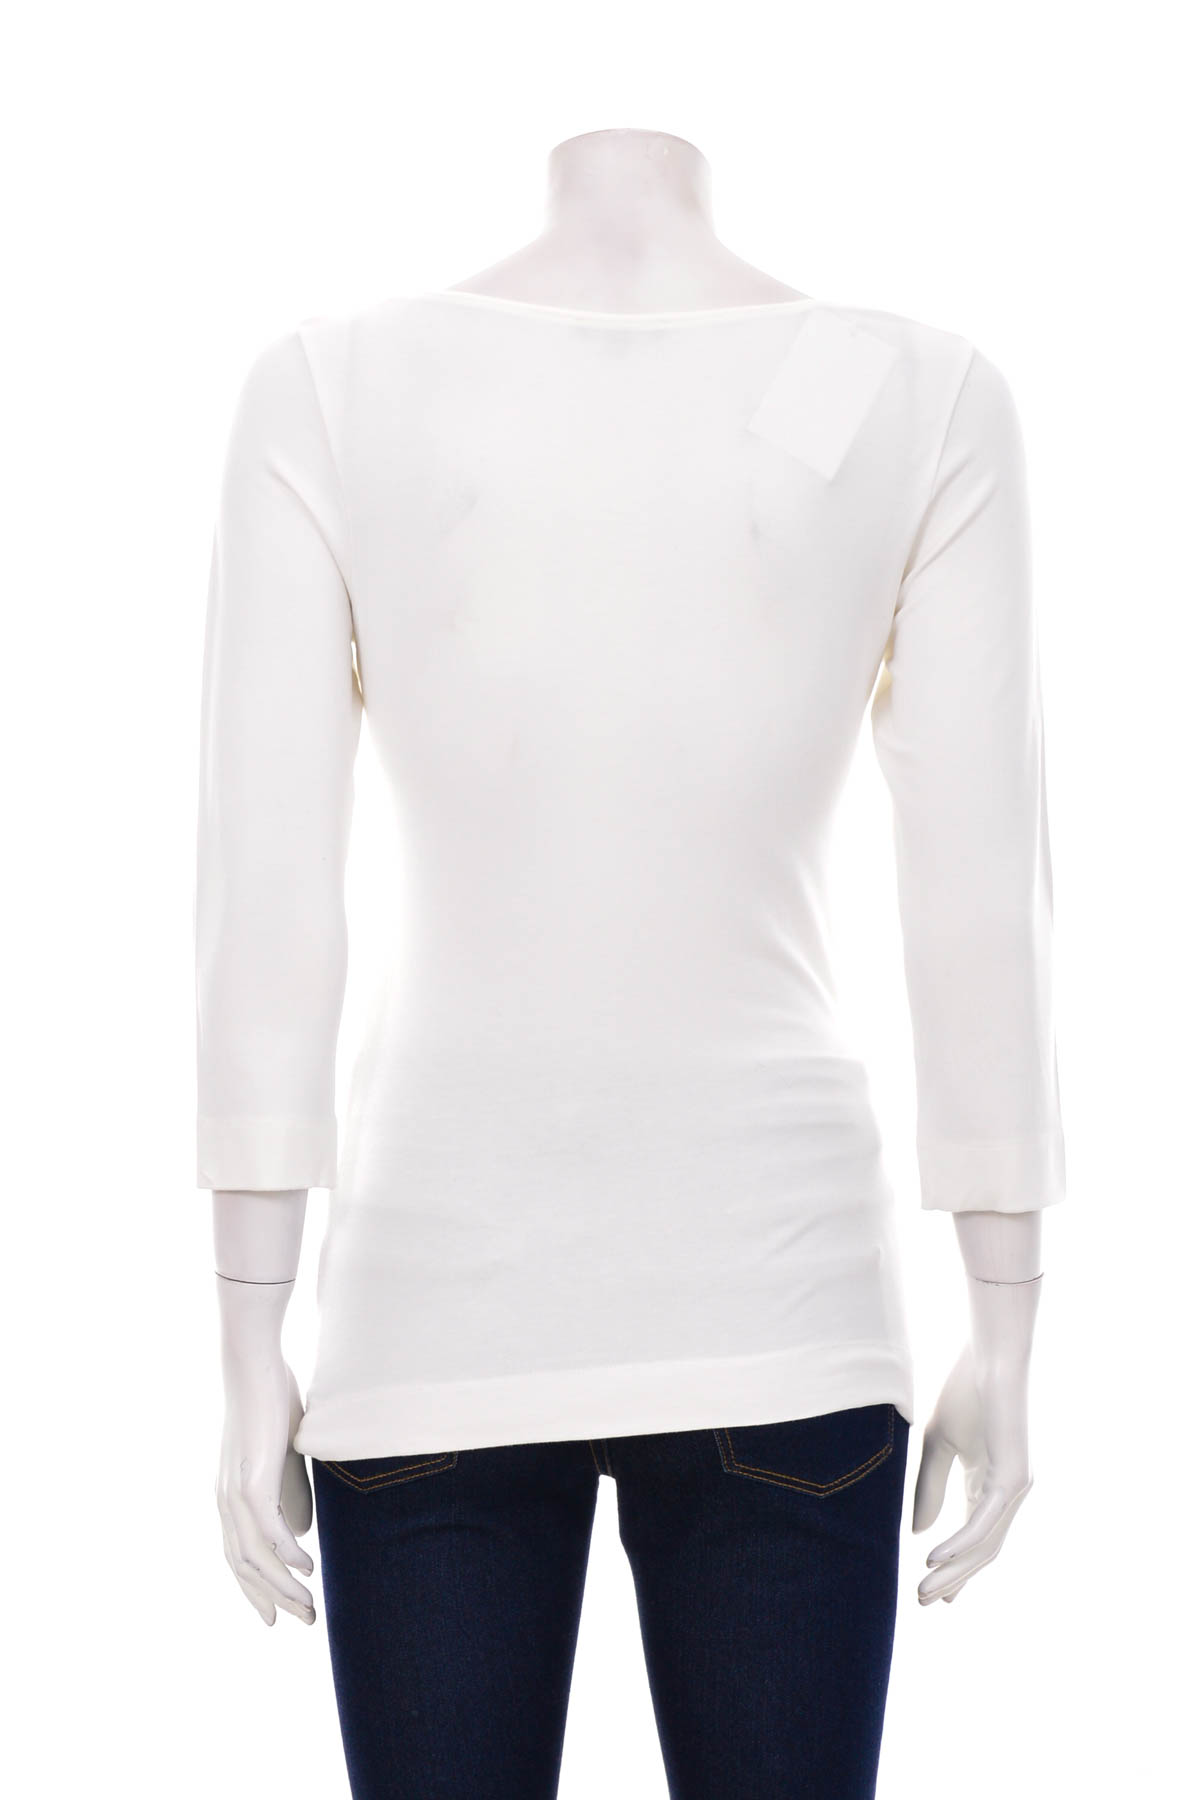 Women's blouse - Claudia Strater - 1